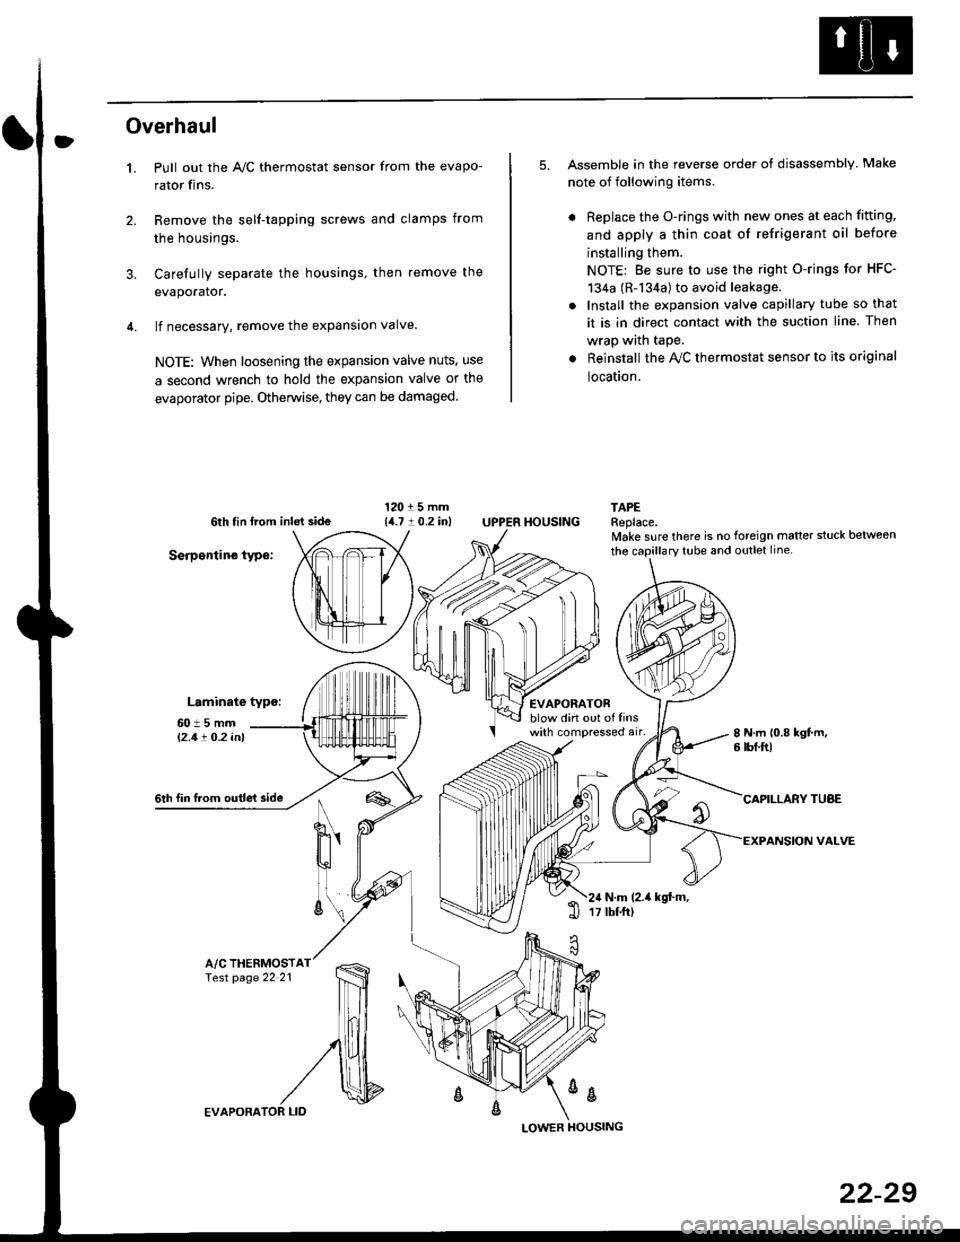 HONDA CIVIC 1999 6.G Workshop Manual Overhaul
1.
3.
Pull out the A,/C thermostat sensor from the evapo-
rator fins.
Remove the self-tapping screws and clamps from
the housings.
Carefully separate the housings, then remove the
evaporator.